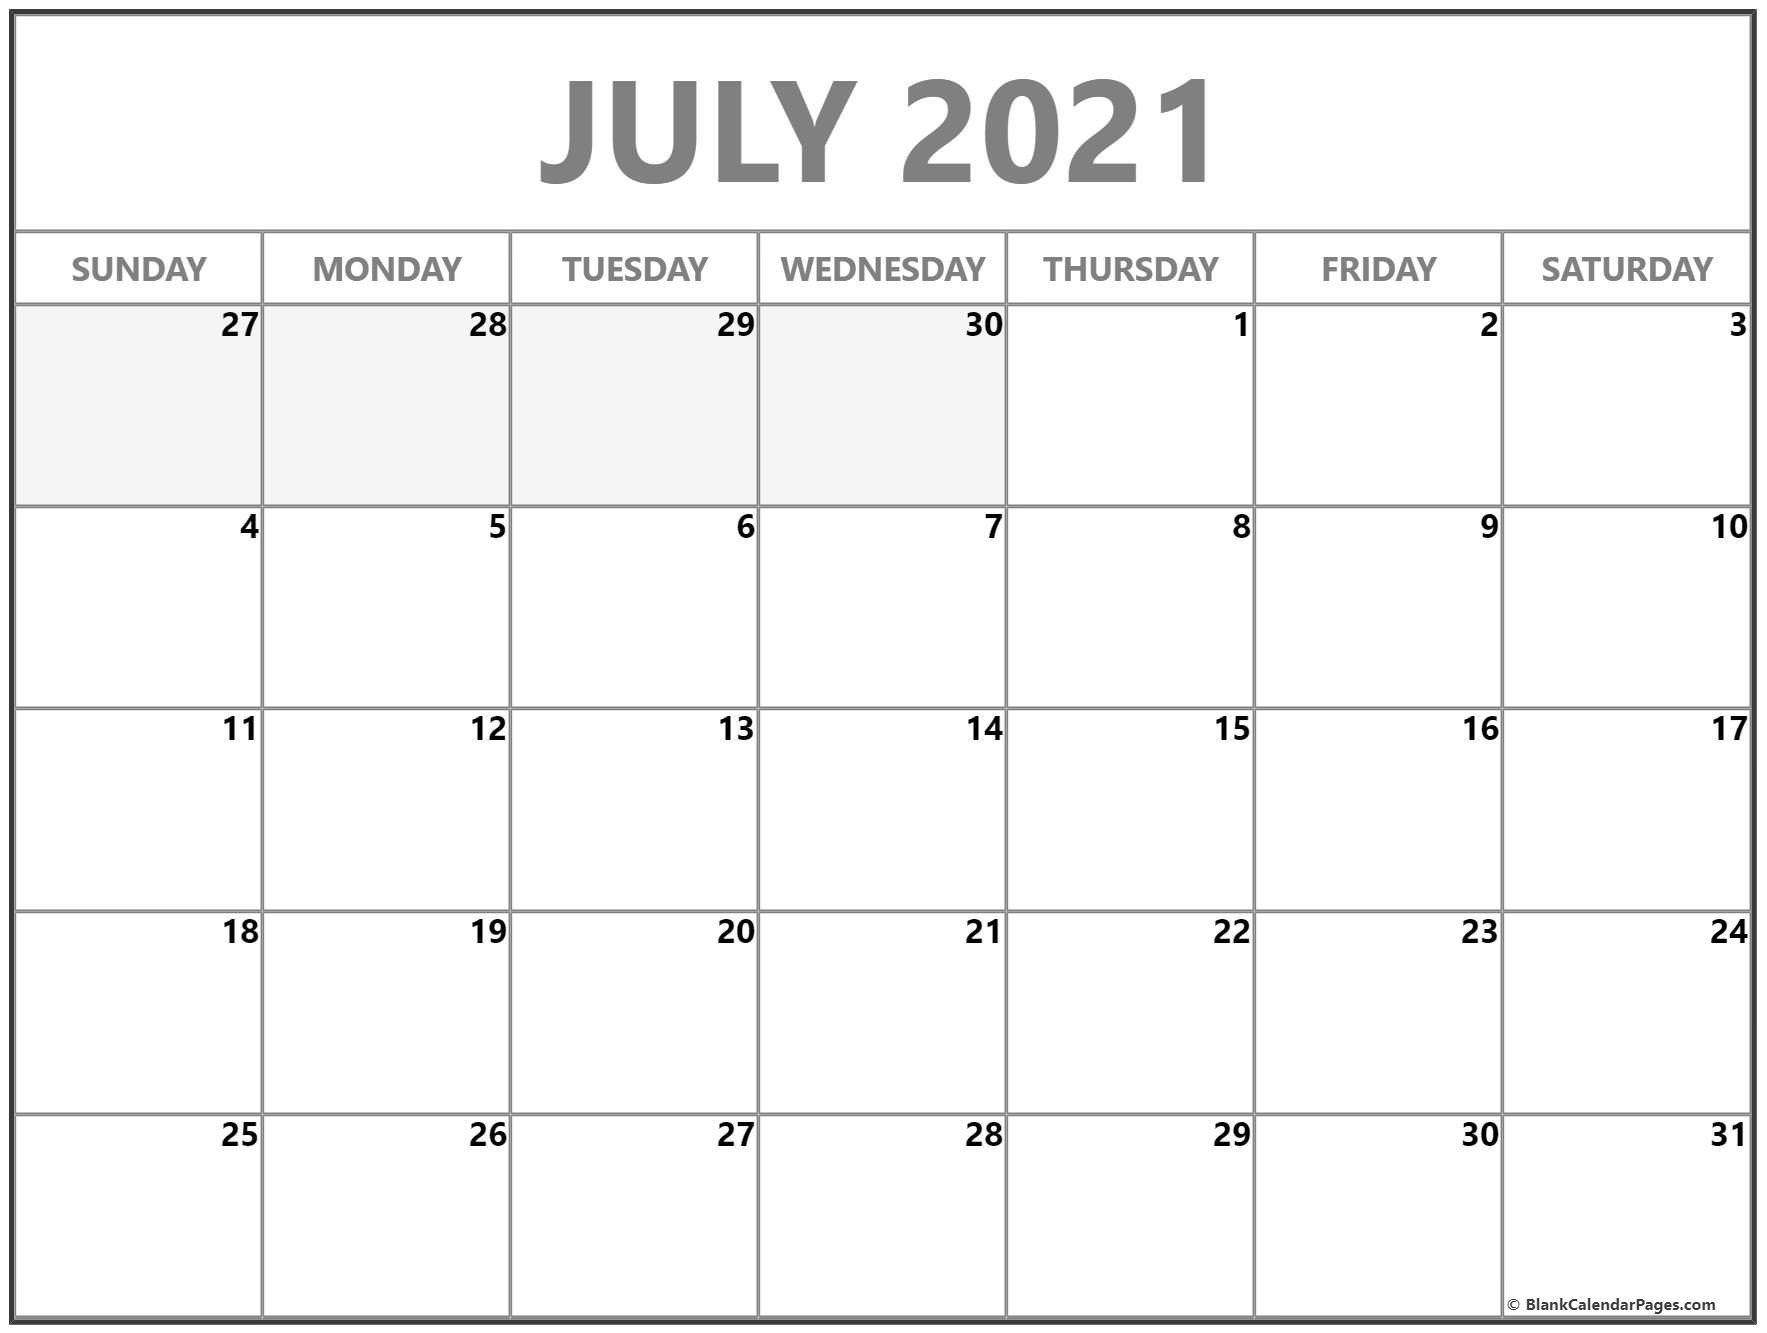 Print Free 2021 Monthly Calendar Without Downloading | Calendar regarding Calendars To Print Without Downloading